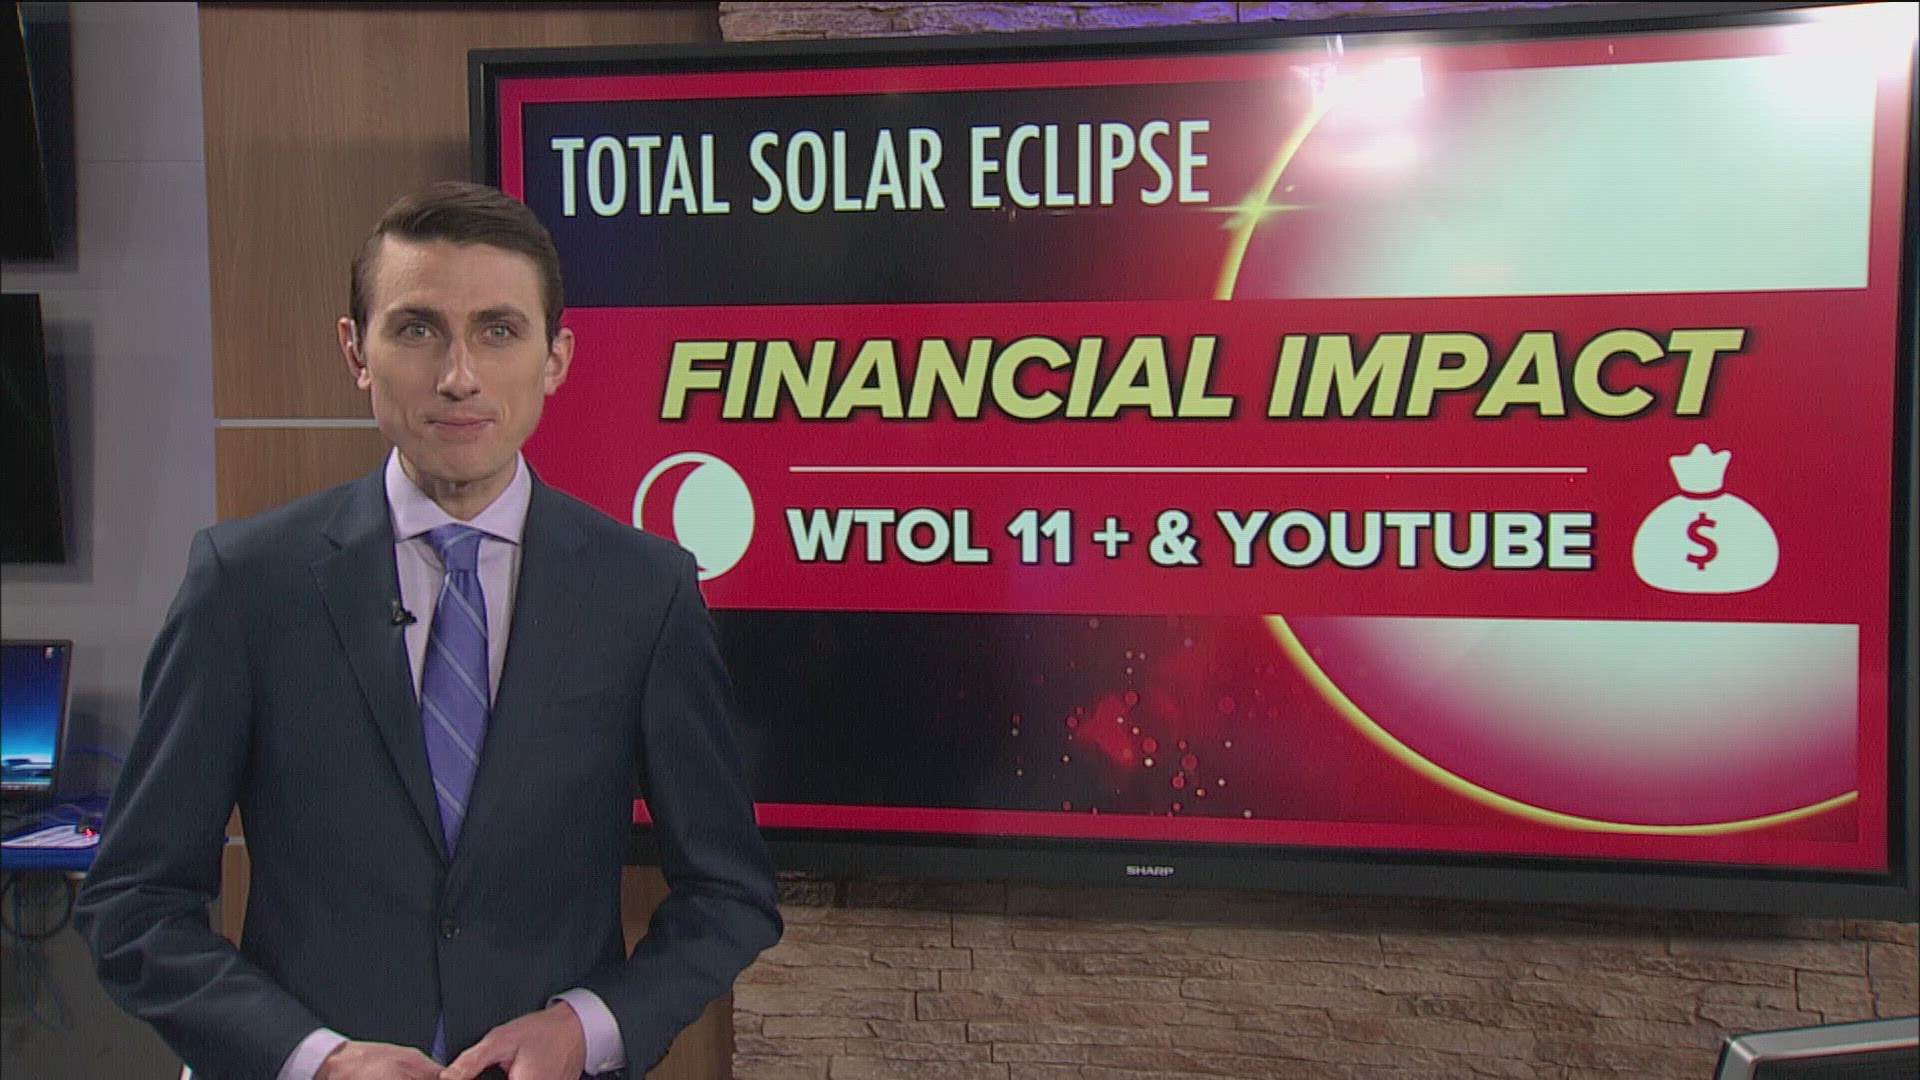 WTOL 11 Meteorologist John Burchfield examines the financial impacts a total solar eclipse can have on communities.